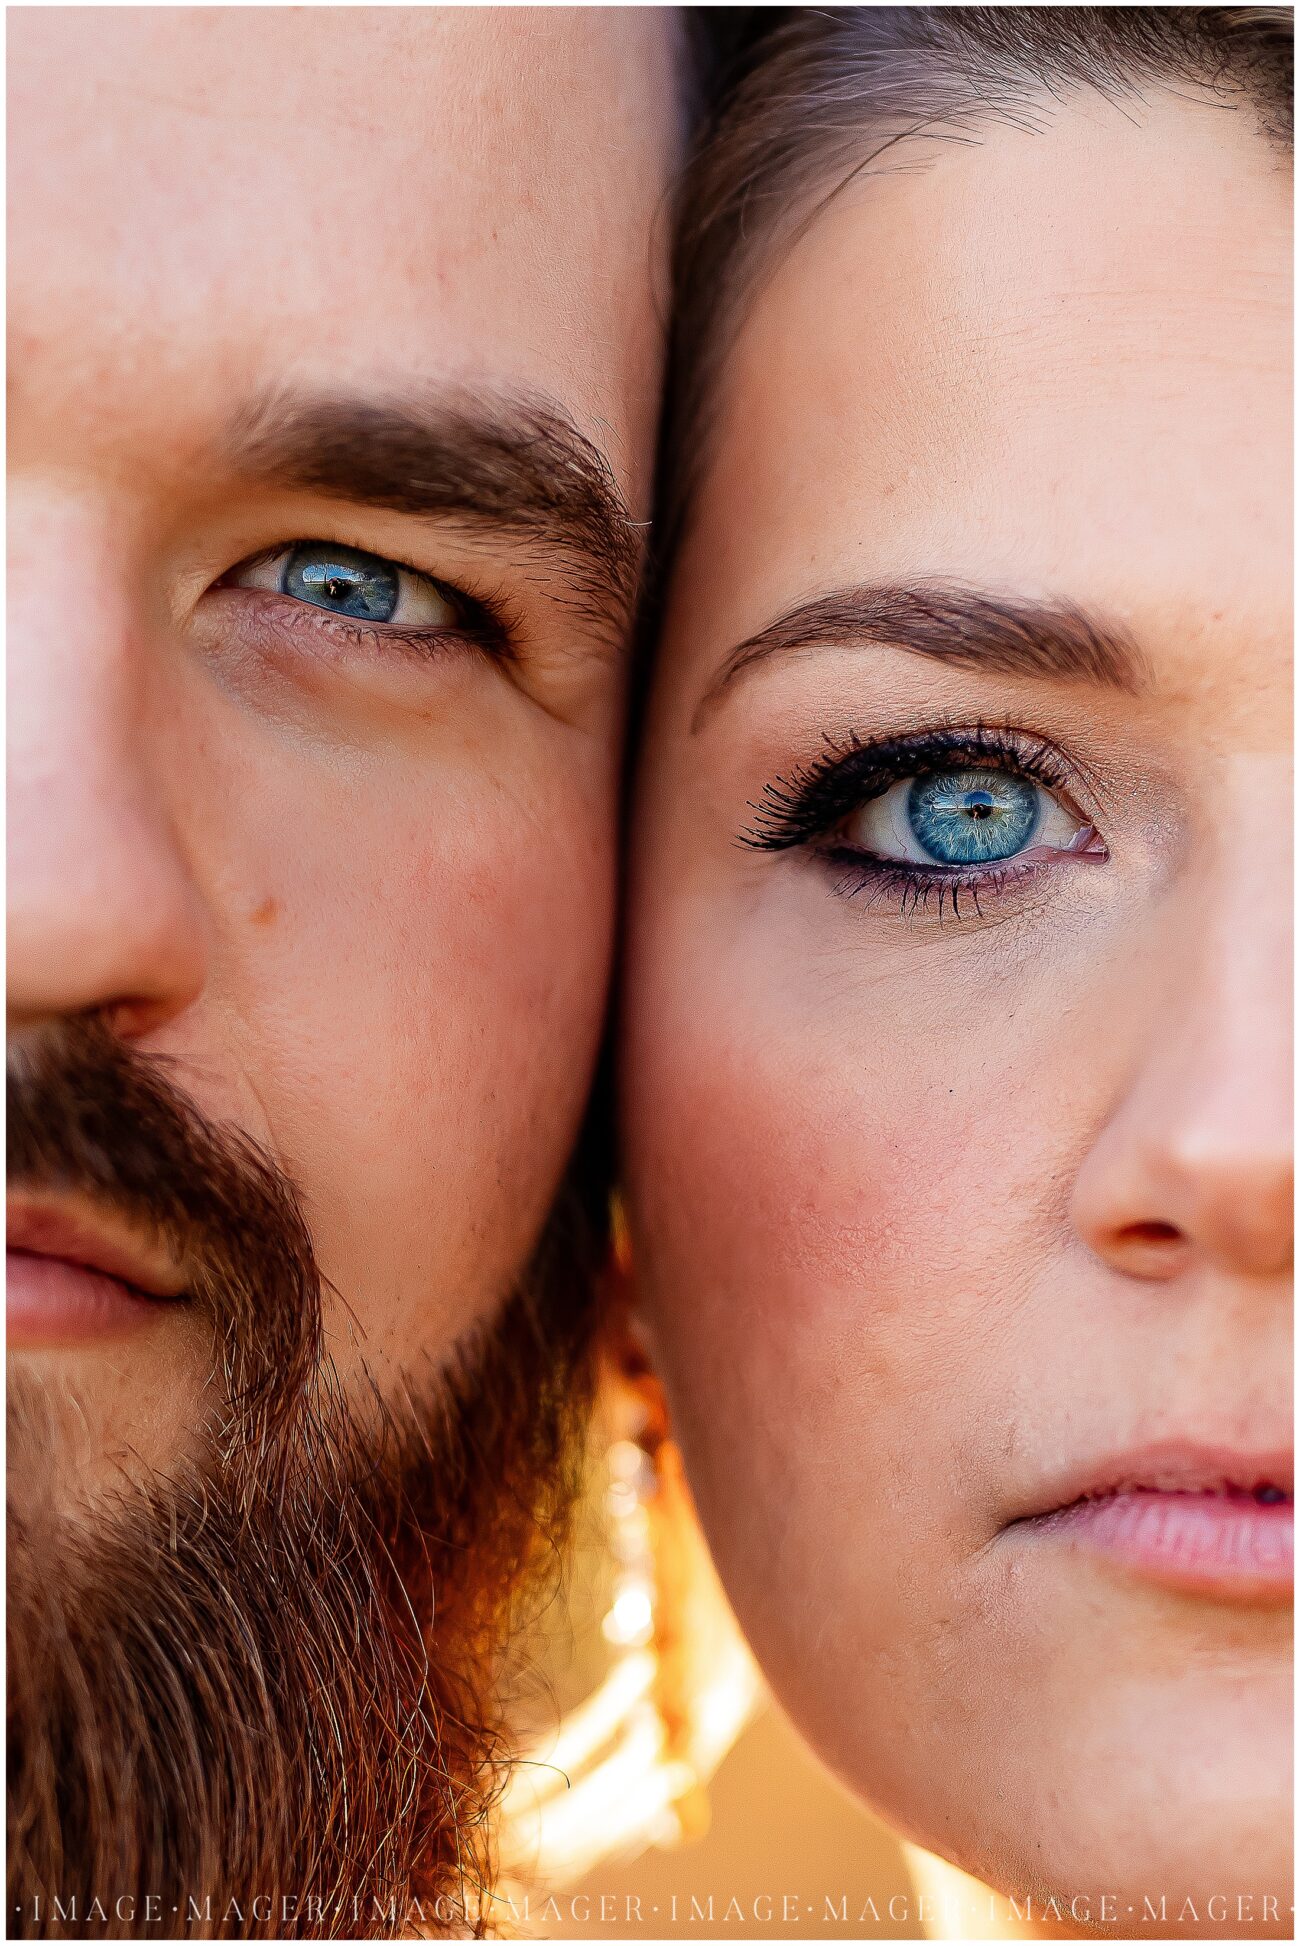 A small town wedding for Casey and Adam. A closeup shot of the bride and groom's gorgeous blue eyes!

Saint John the Baptist Catholic Church, L'erable, IL. 

Photo taken by Mager Image Photography.